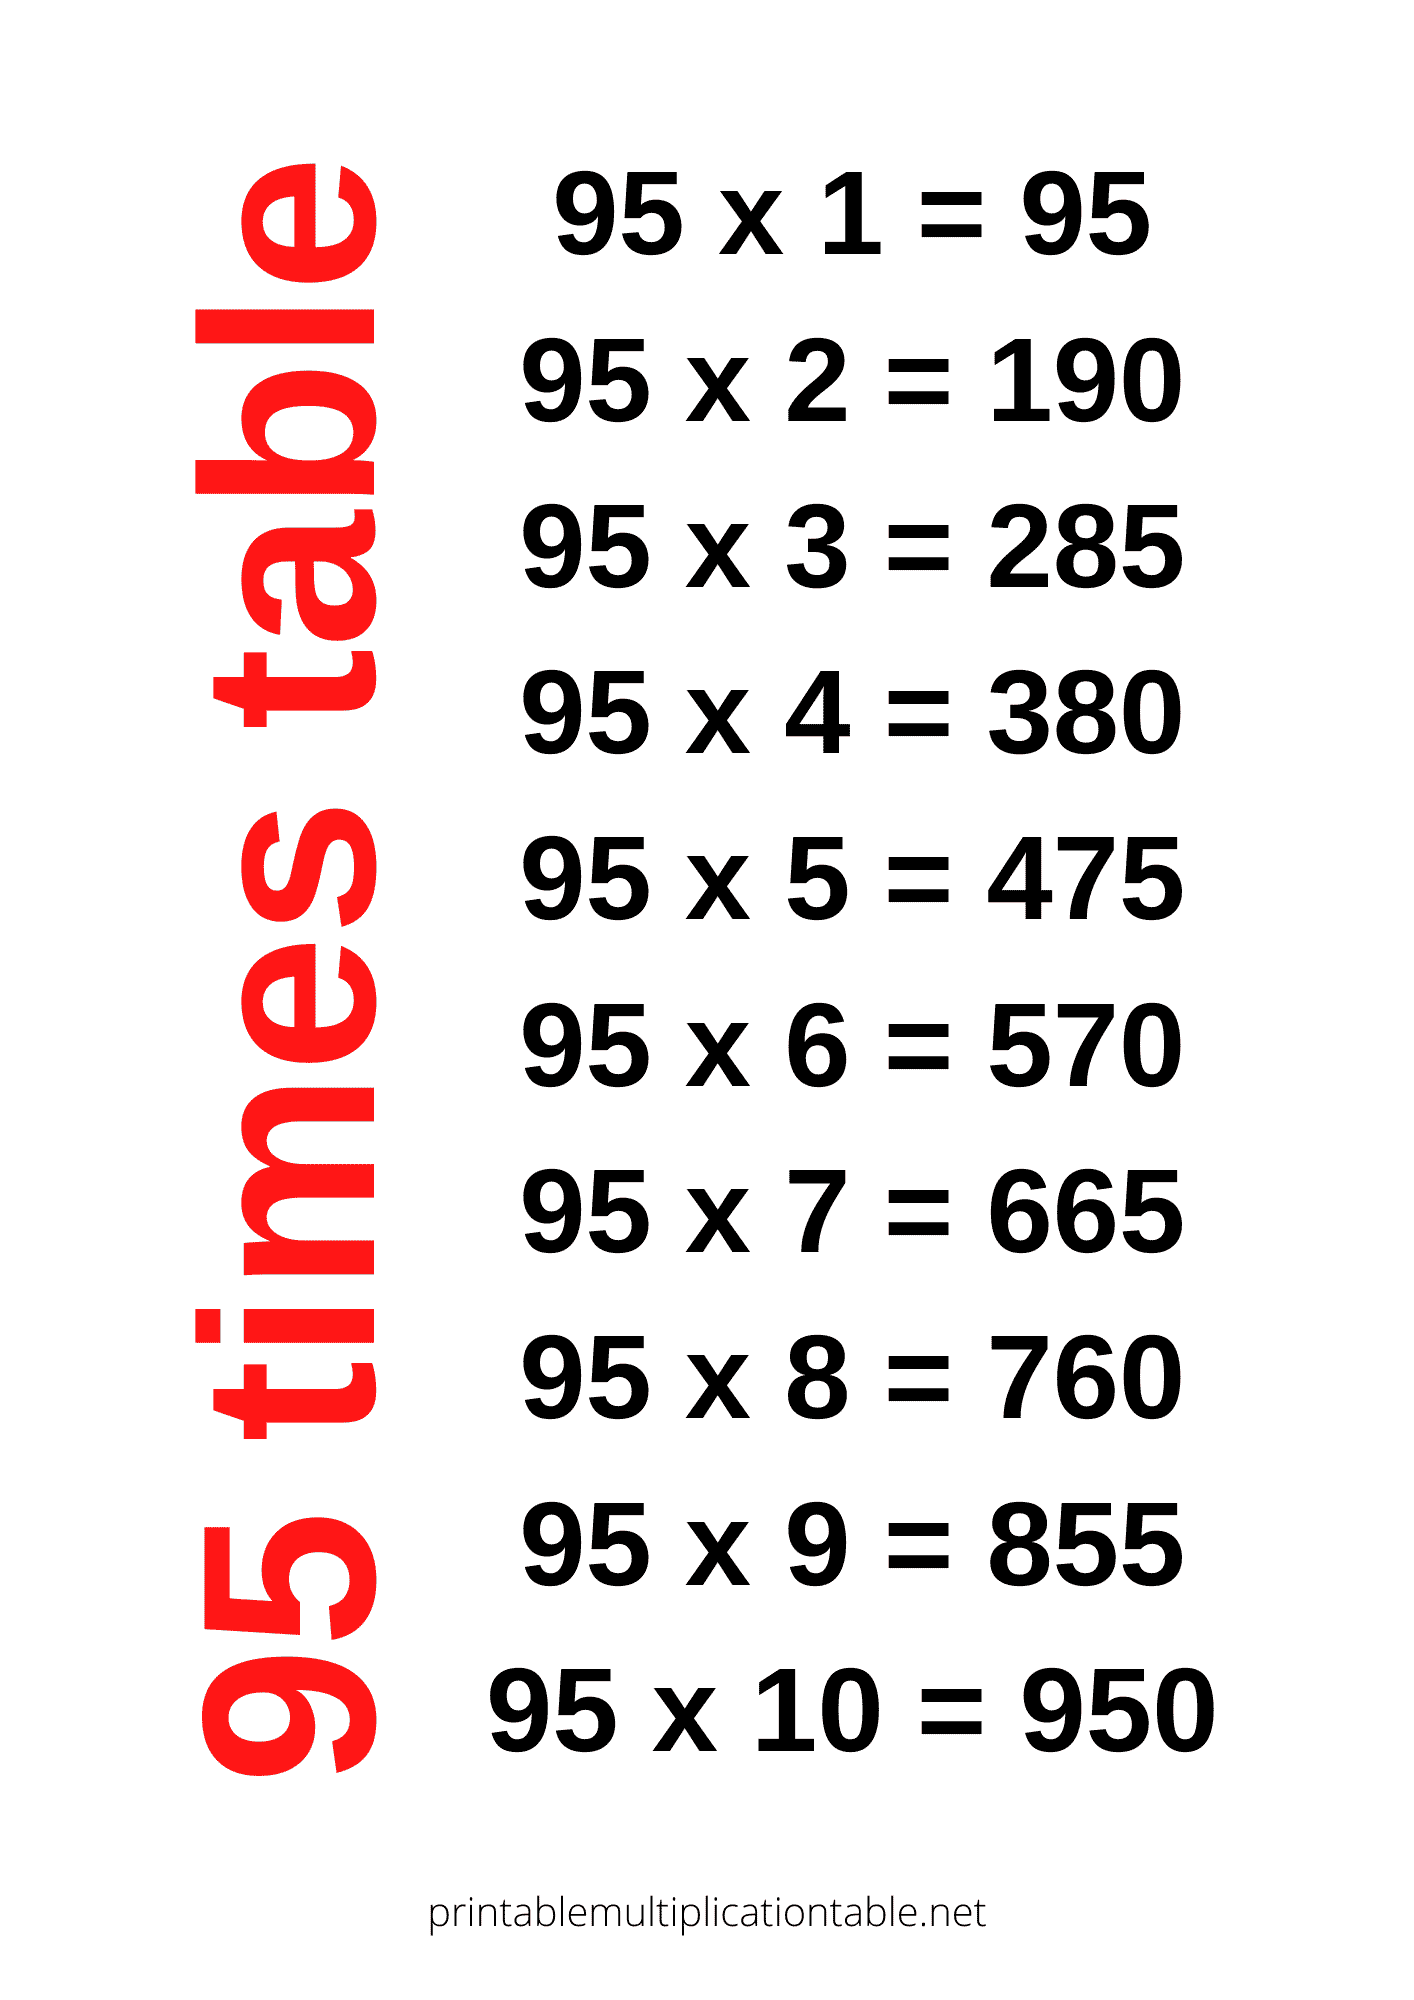 95 times table chart